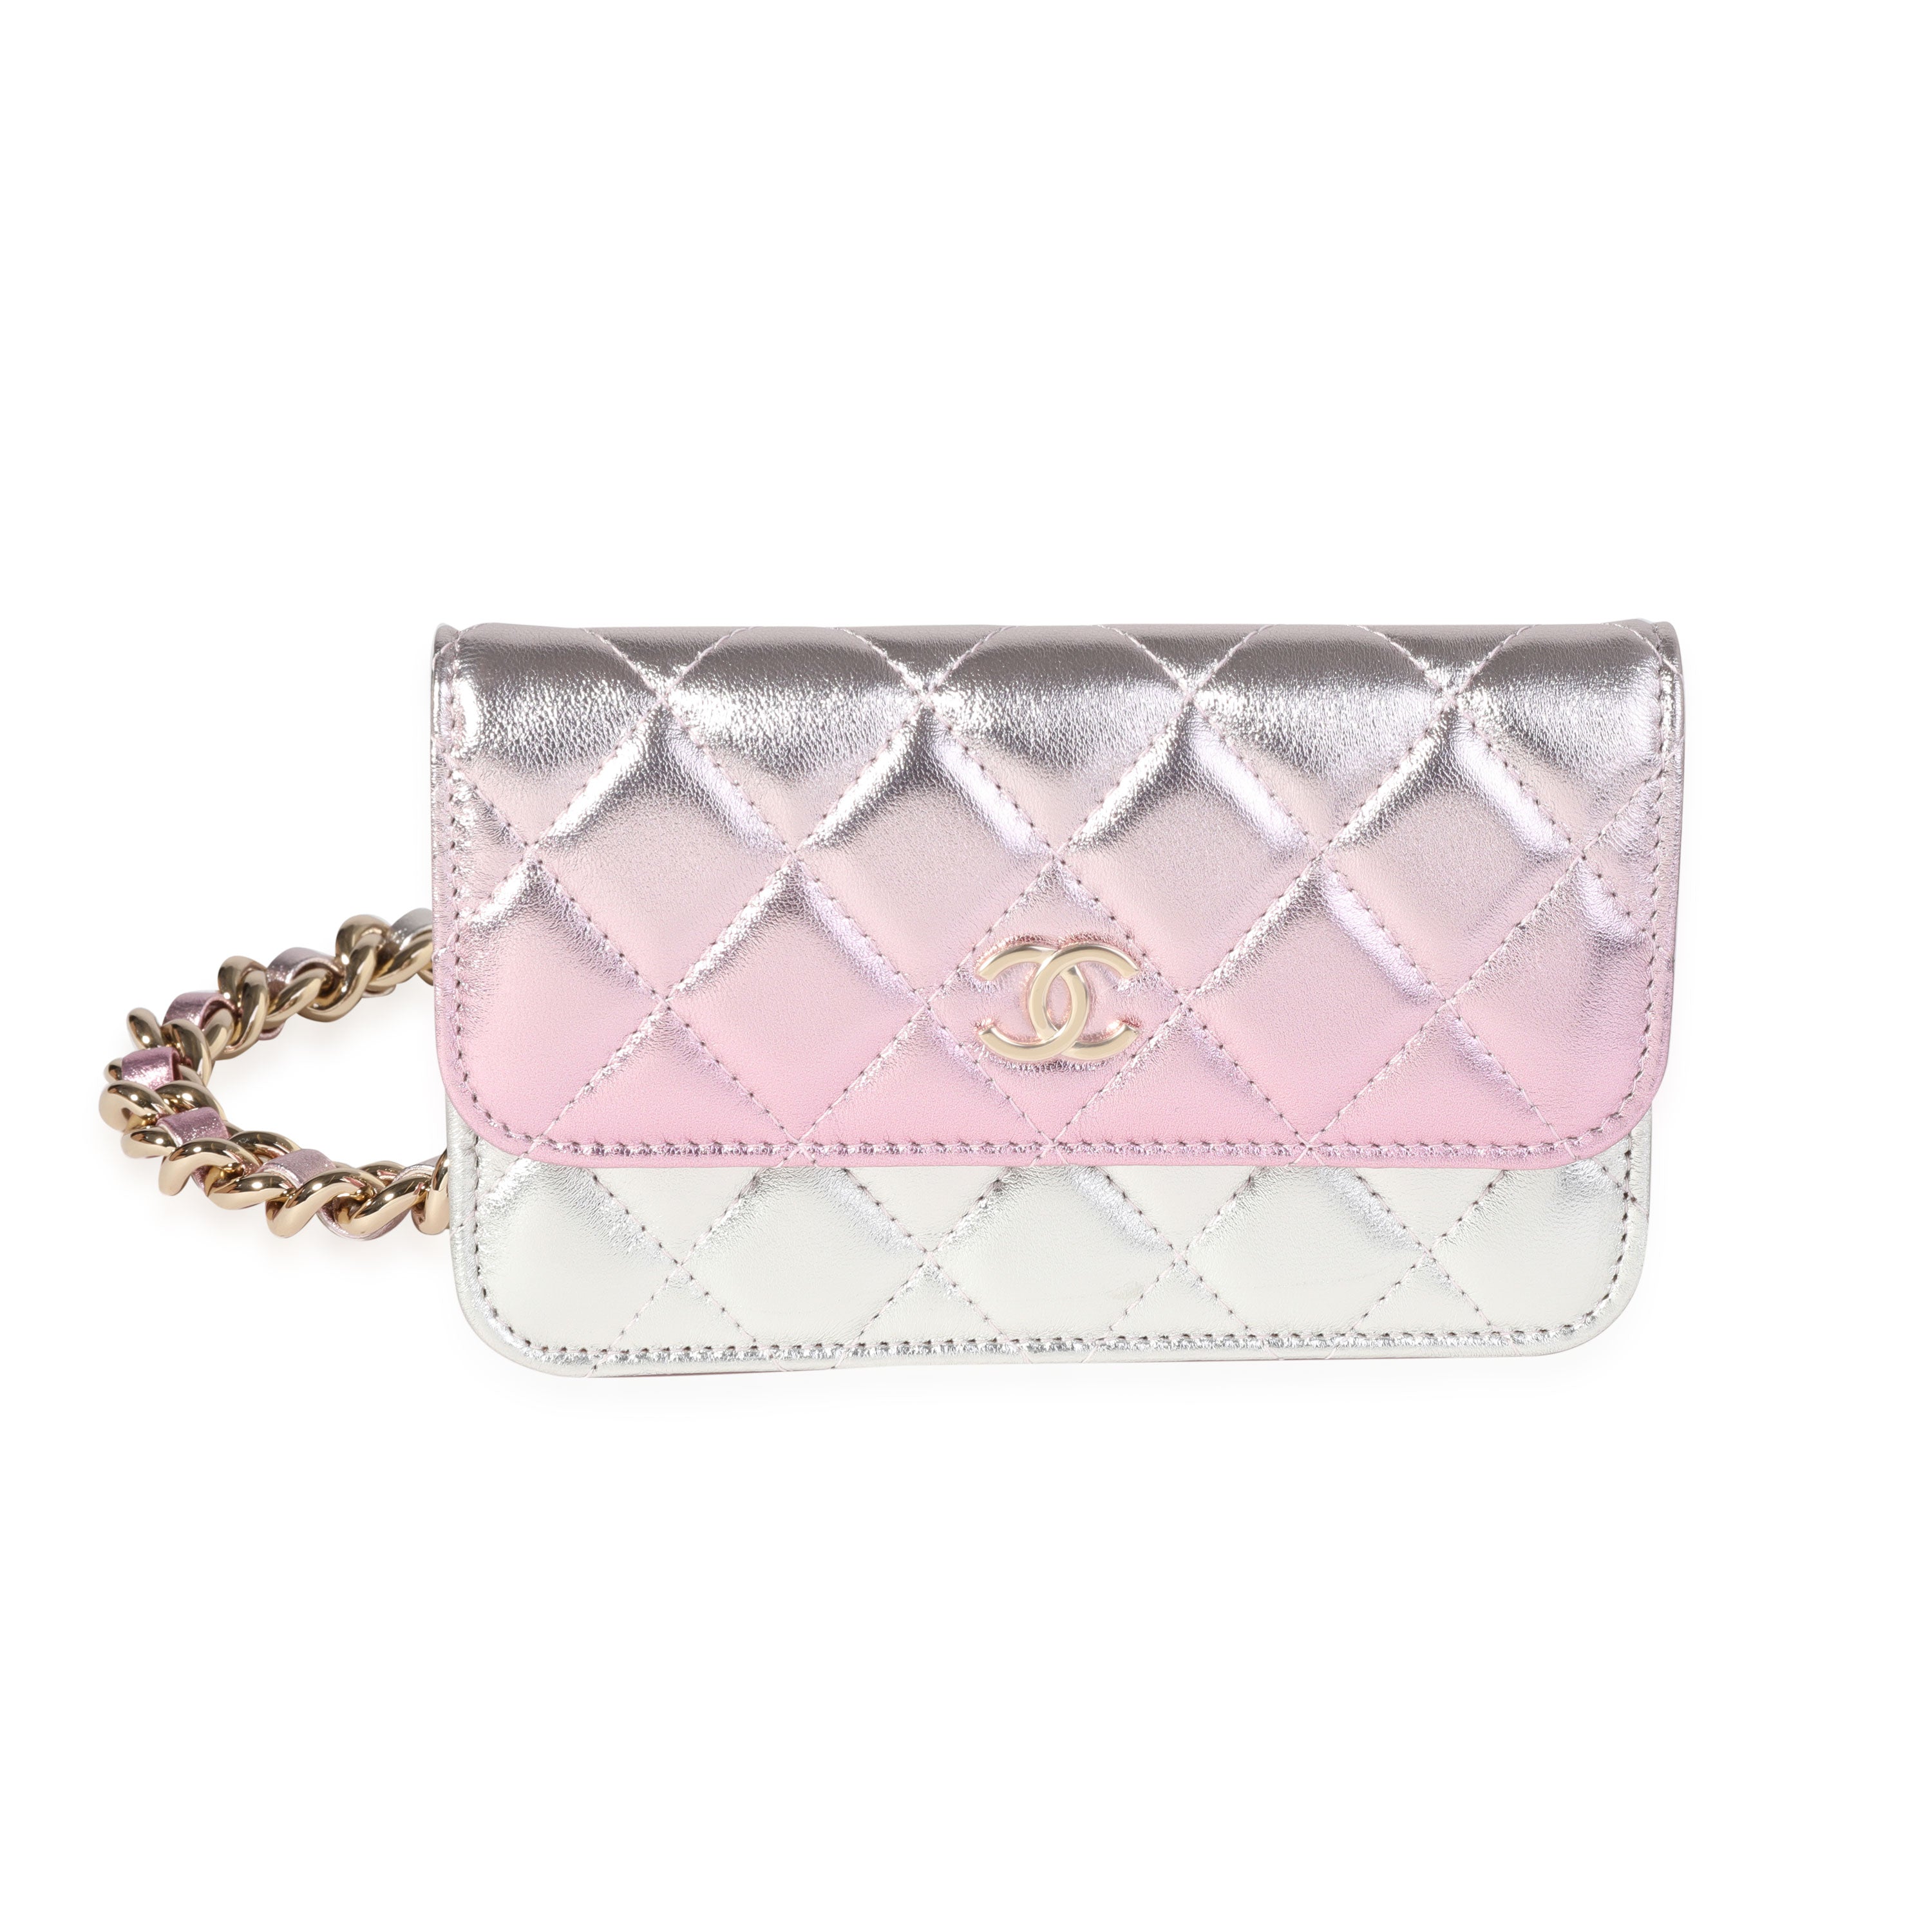 Chanel Quilted Round Clutch With Pearl Chain Iridescent Pink Lambskin –  Coco Approved Studio